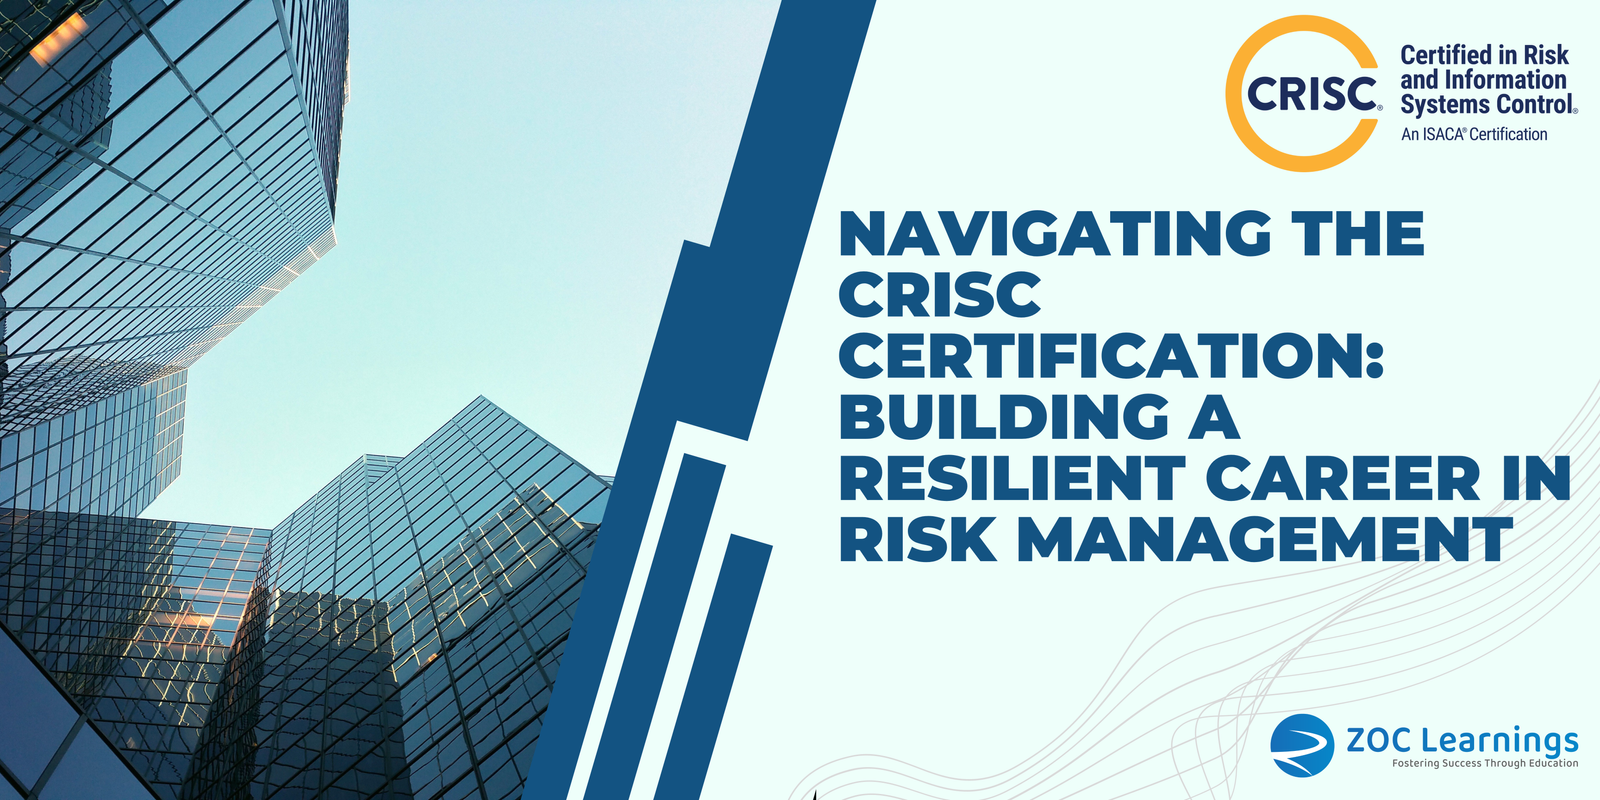 Navigating the CRISC Certification: Building a Resilient Career in Risk Management